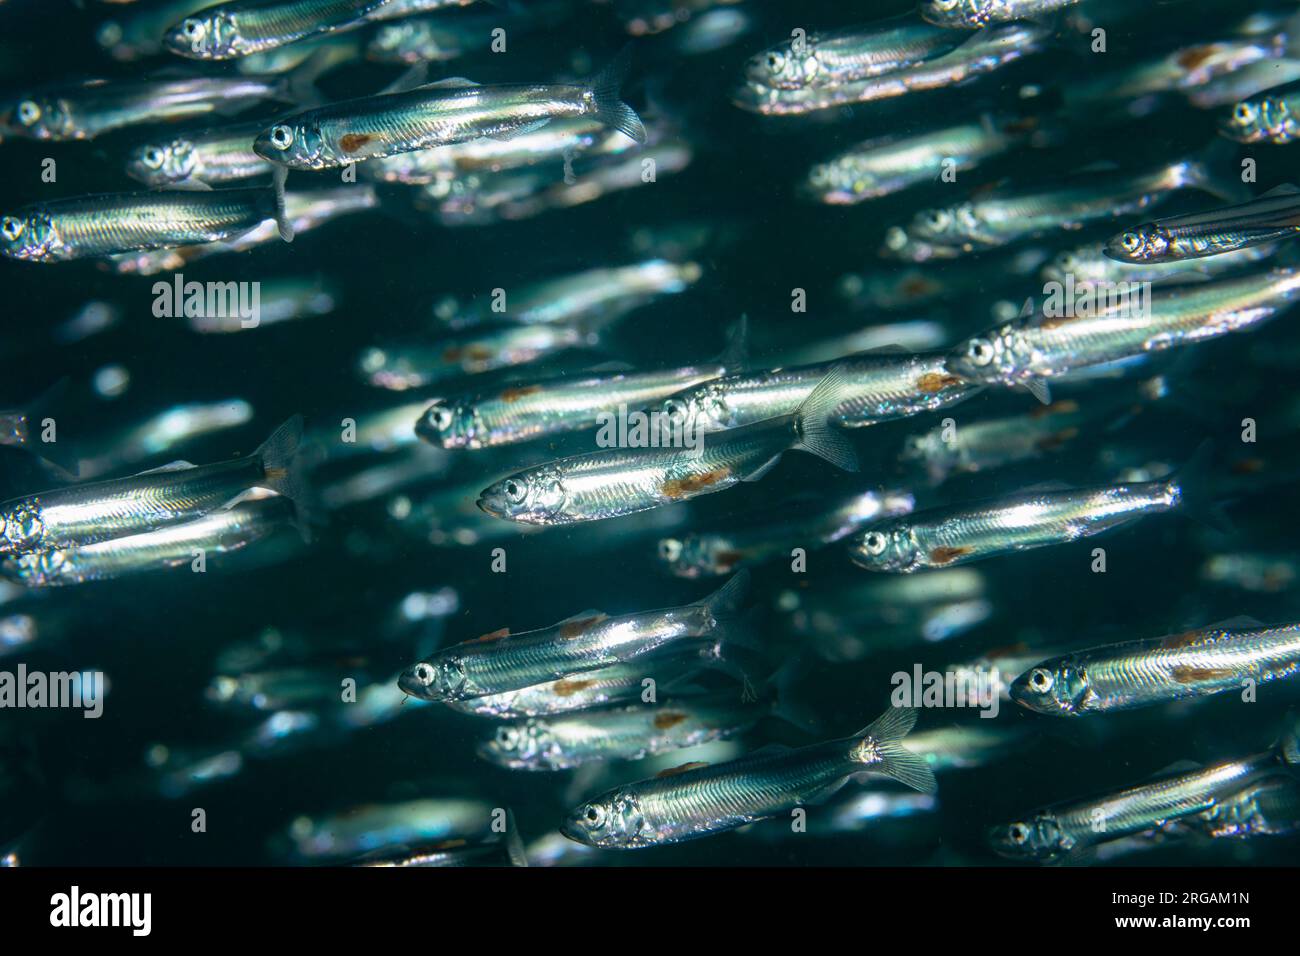 Schooling Sand Smelts at St. Abbs, Scotland Stock Photo